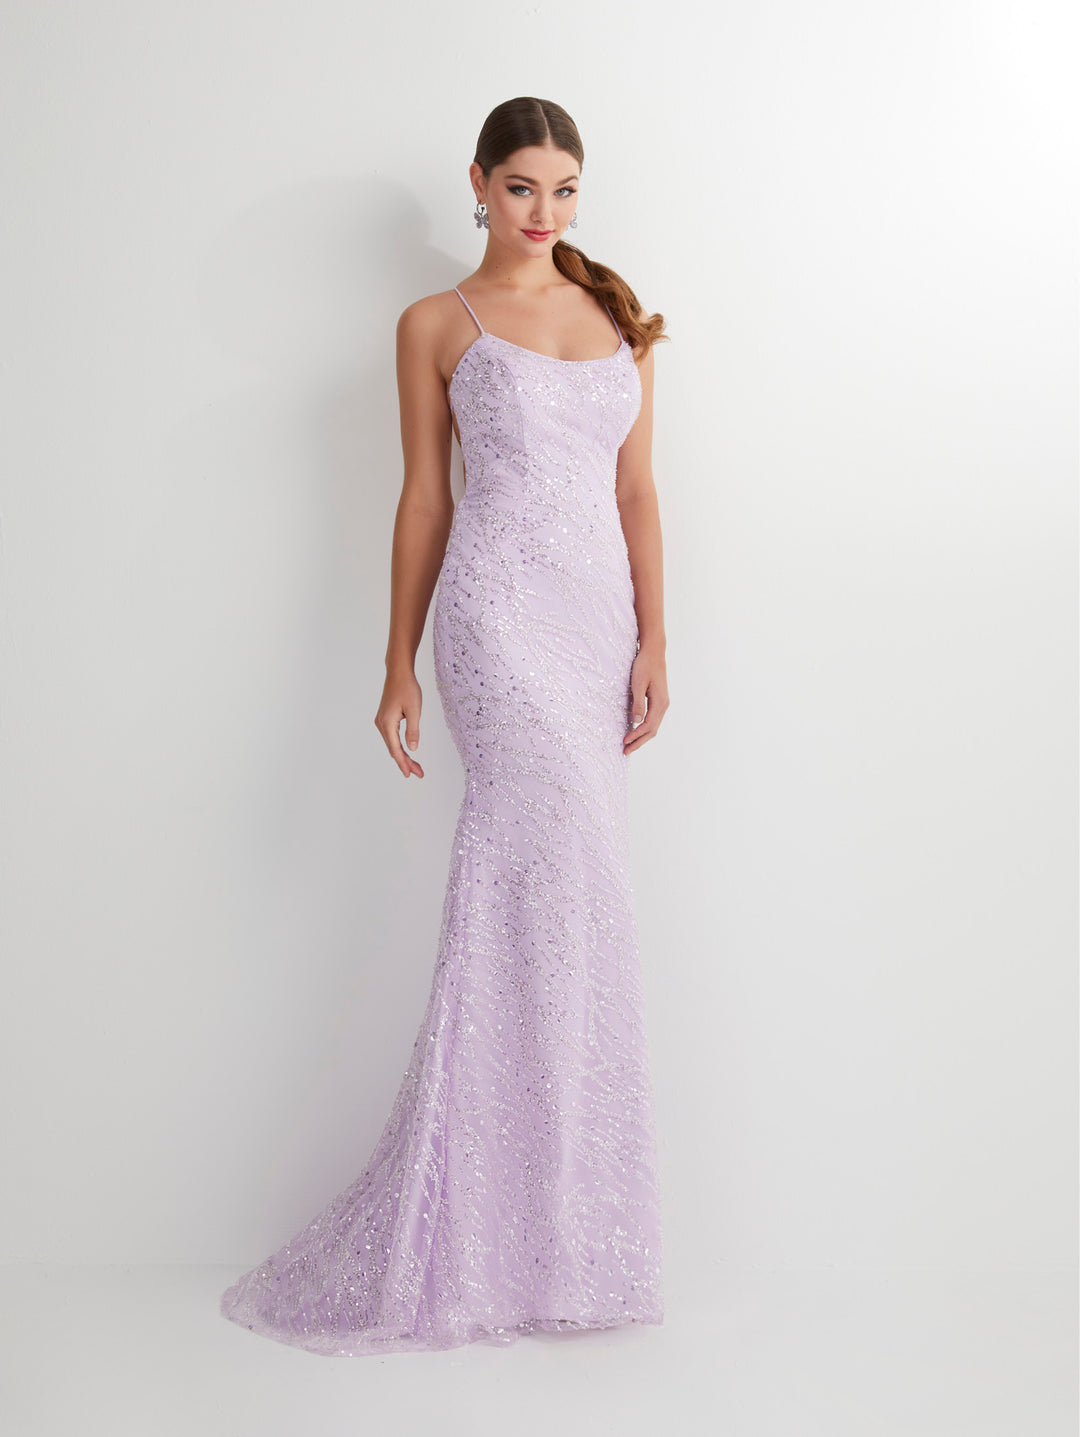 Fitted Sequin Lace-Up Back Gown by Studio 17 12893